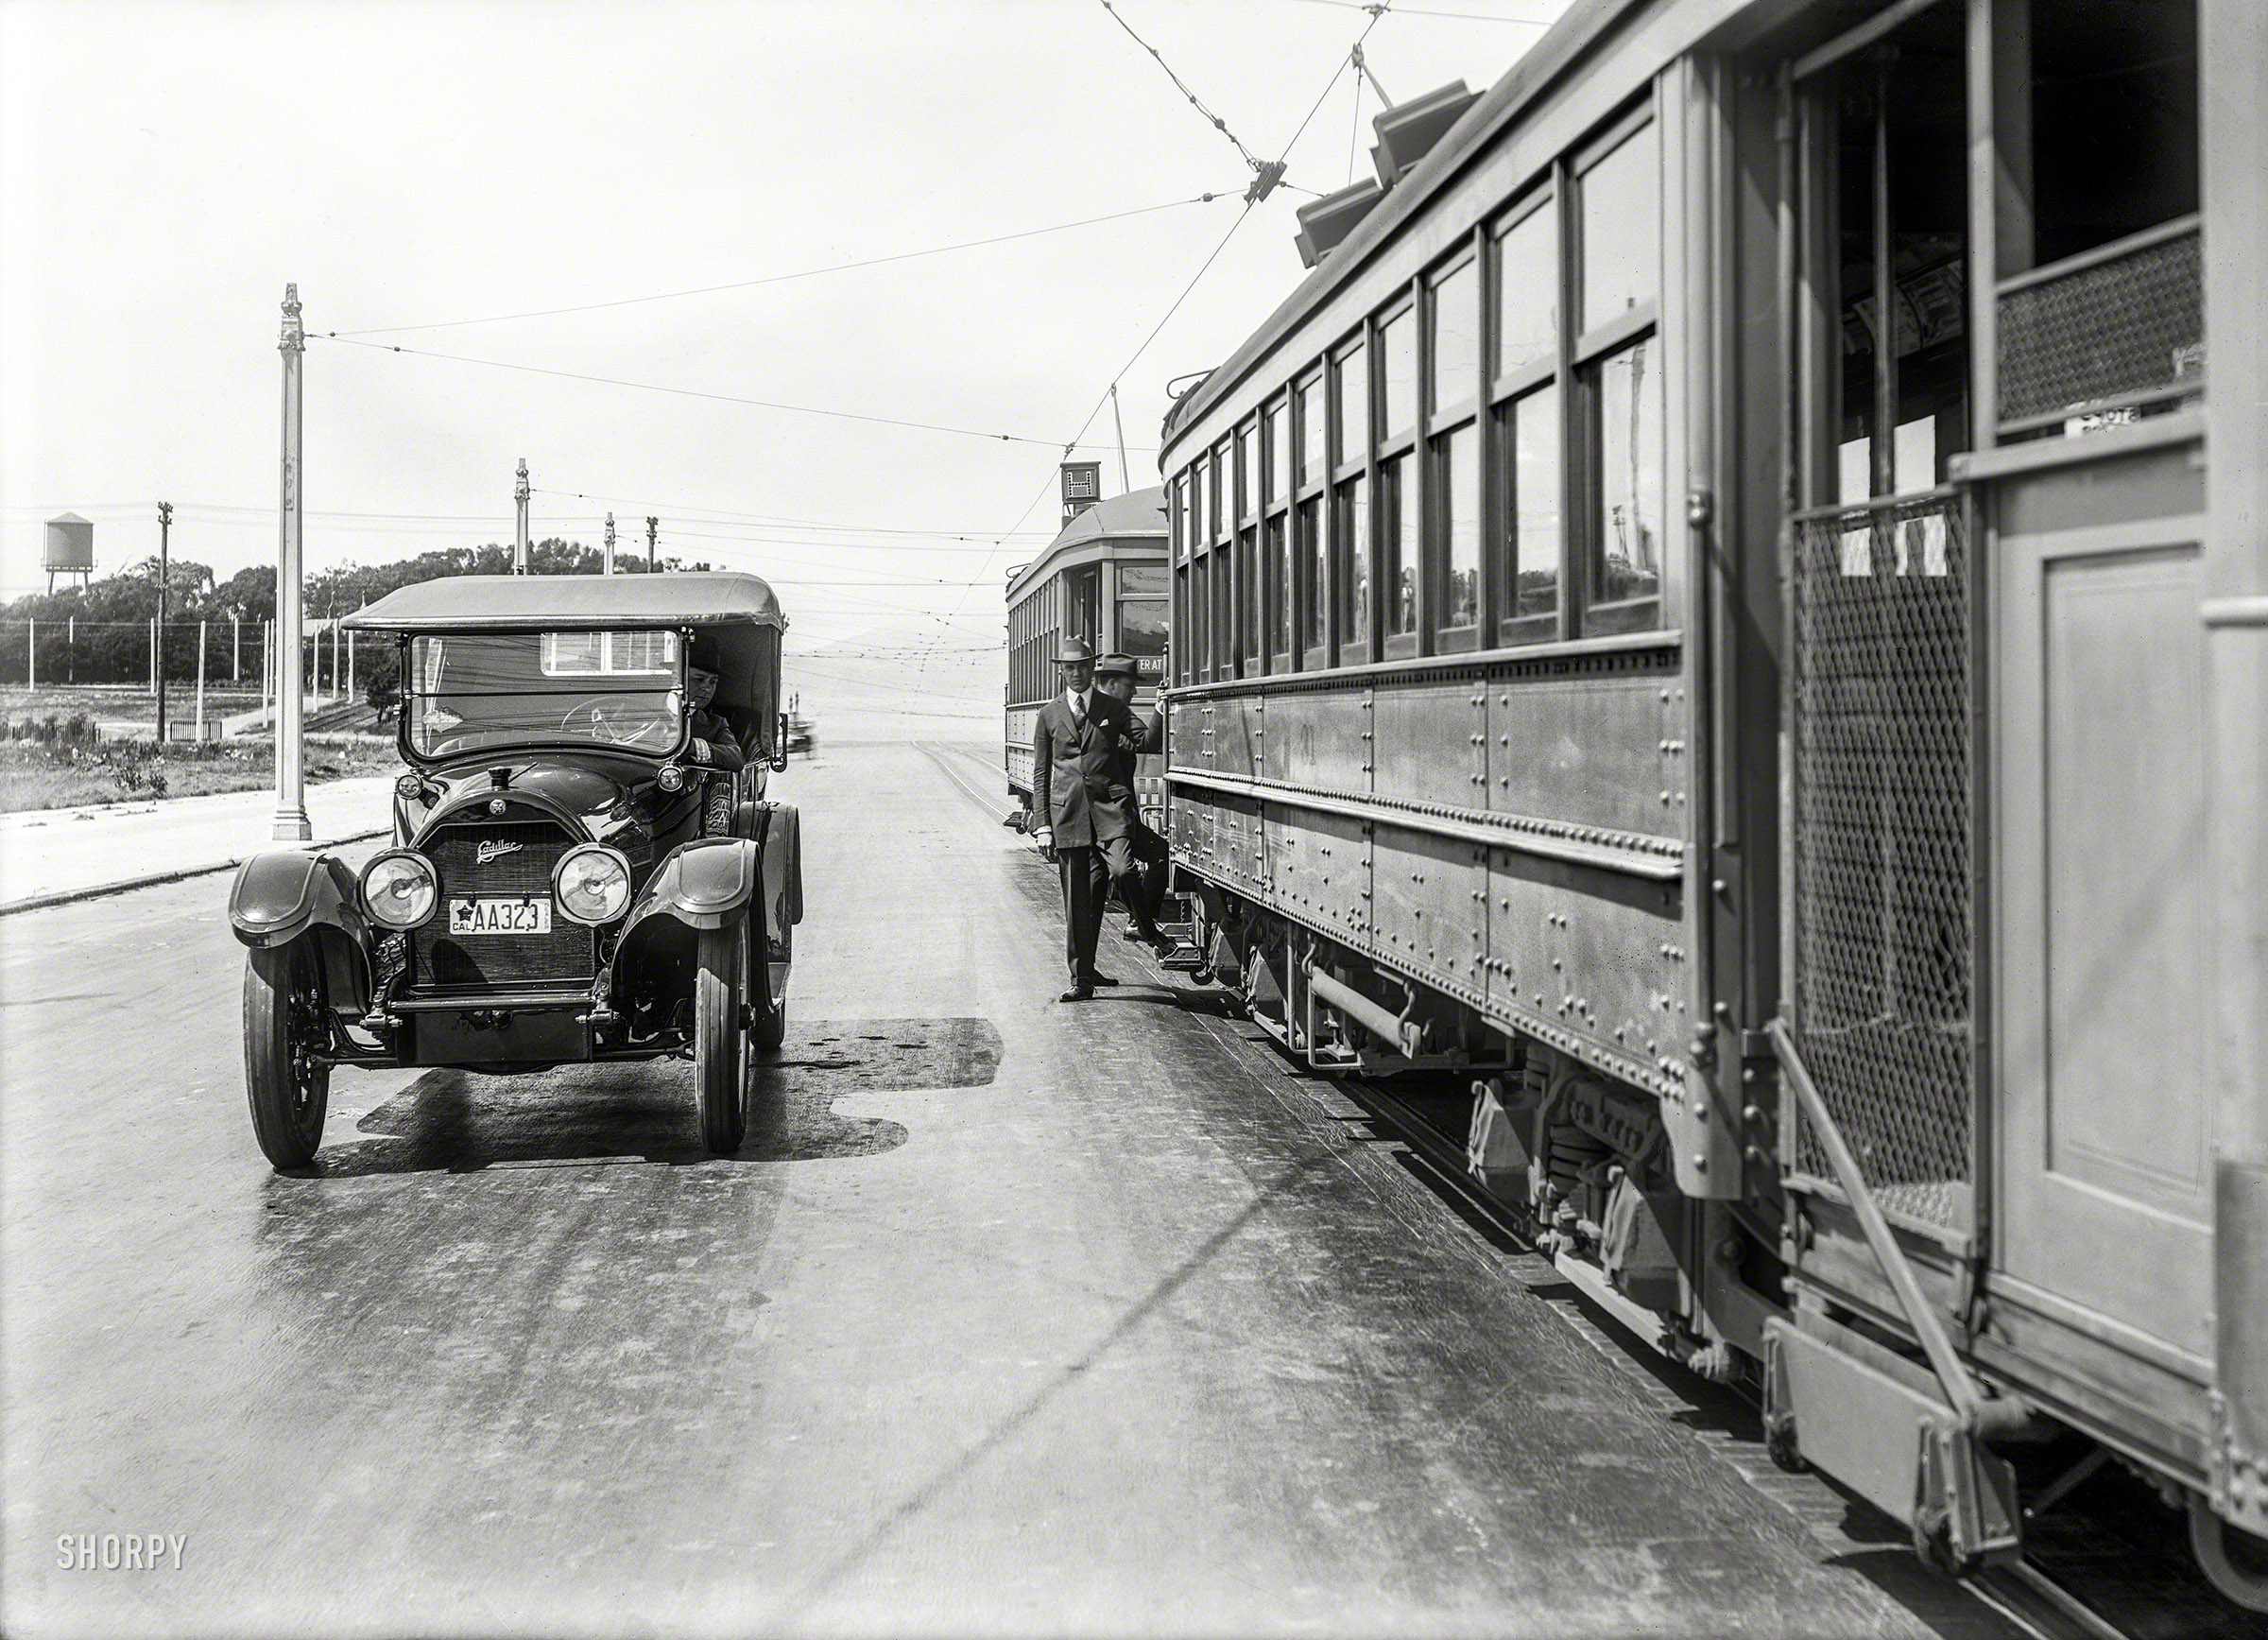 1919. "Cadillac touring car at rail stop." H Line streetcars of the San Francisco Municipal Railway. 5x7 glass negative by Christopher Helin. View full size.